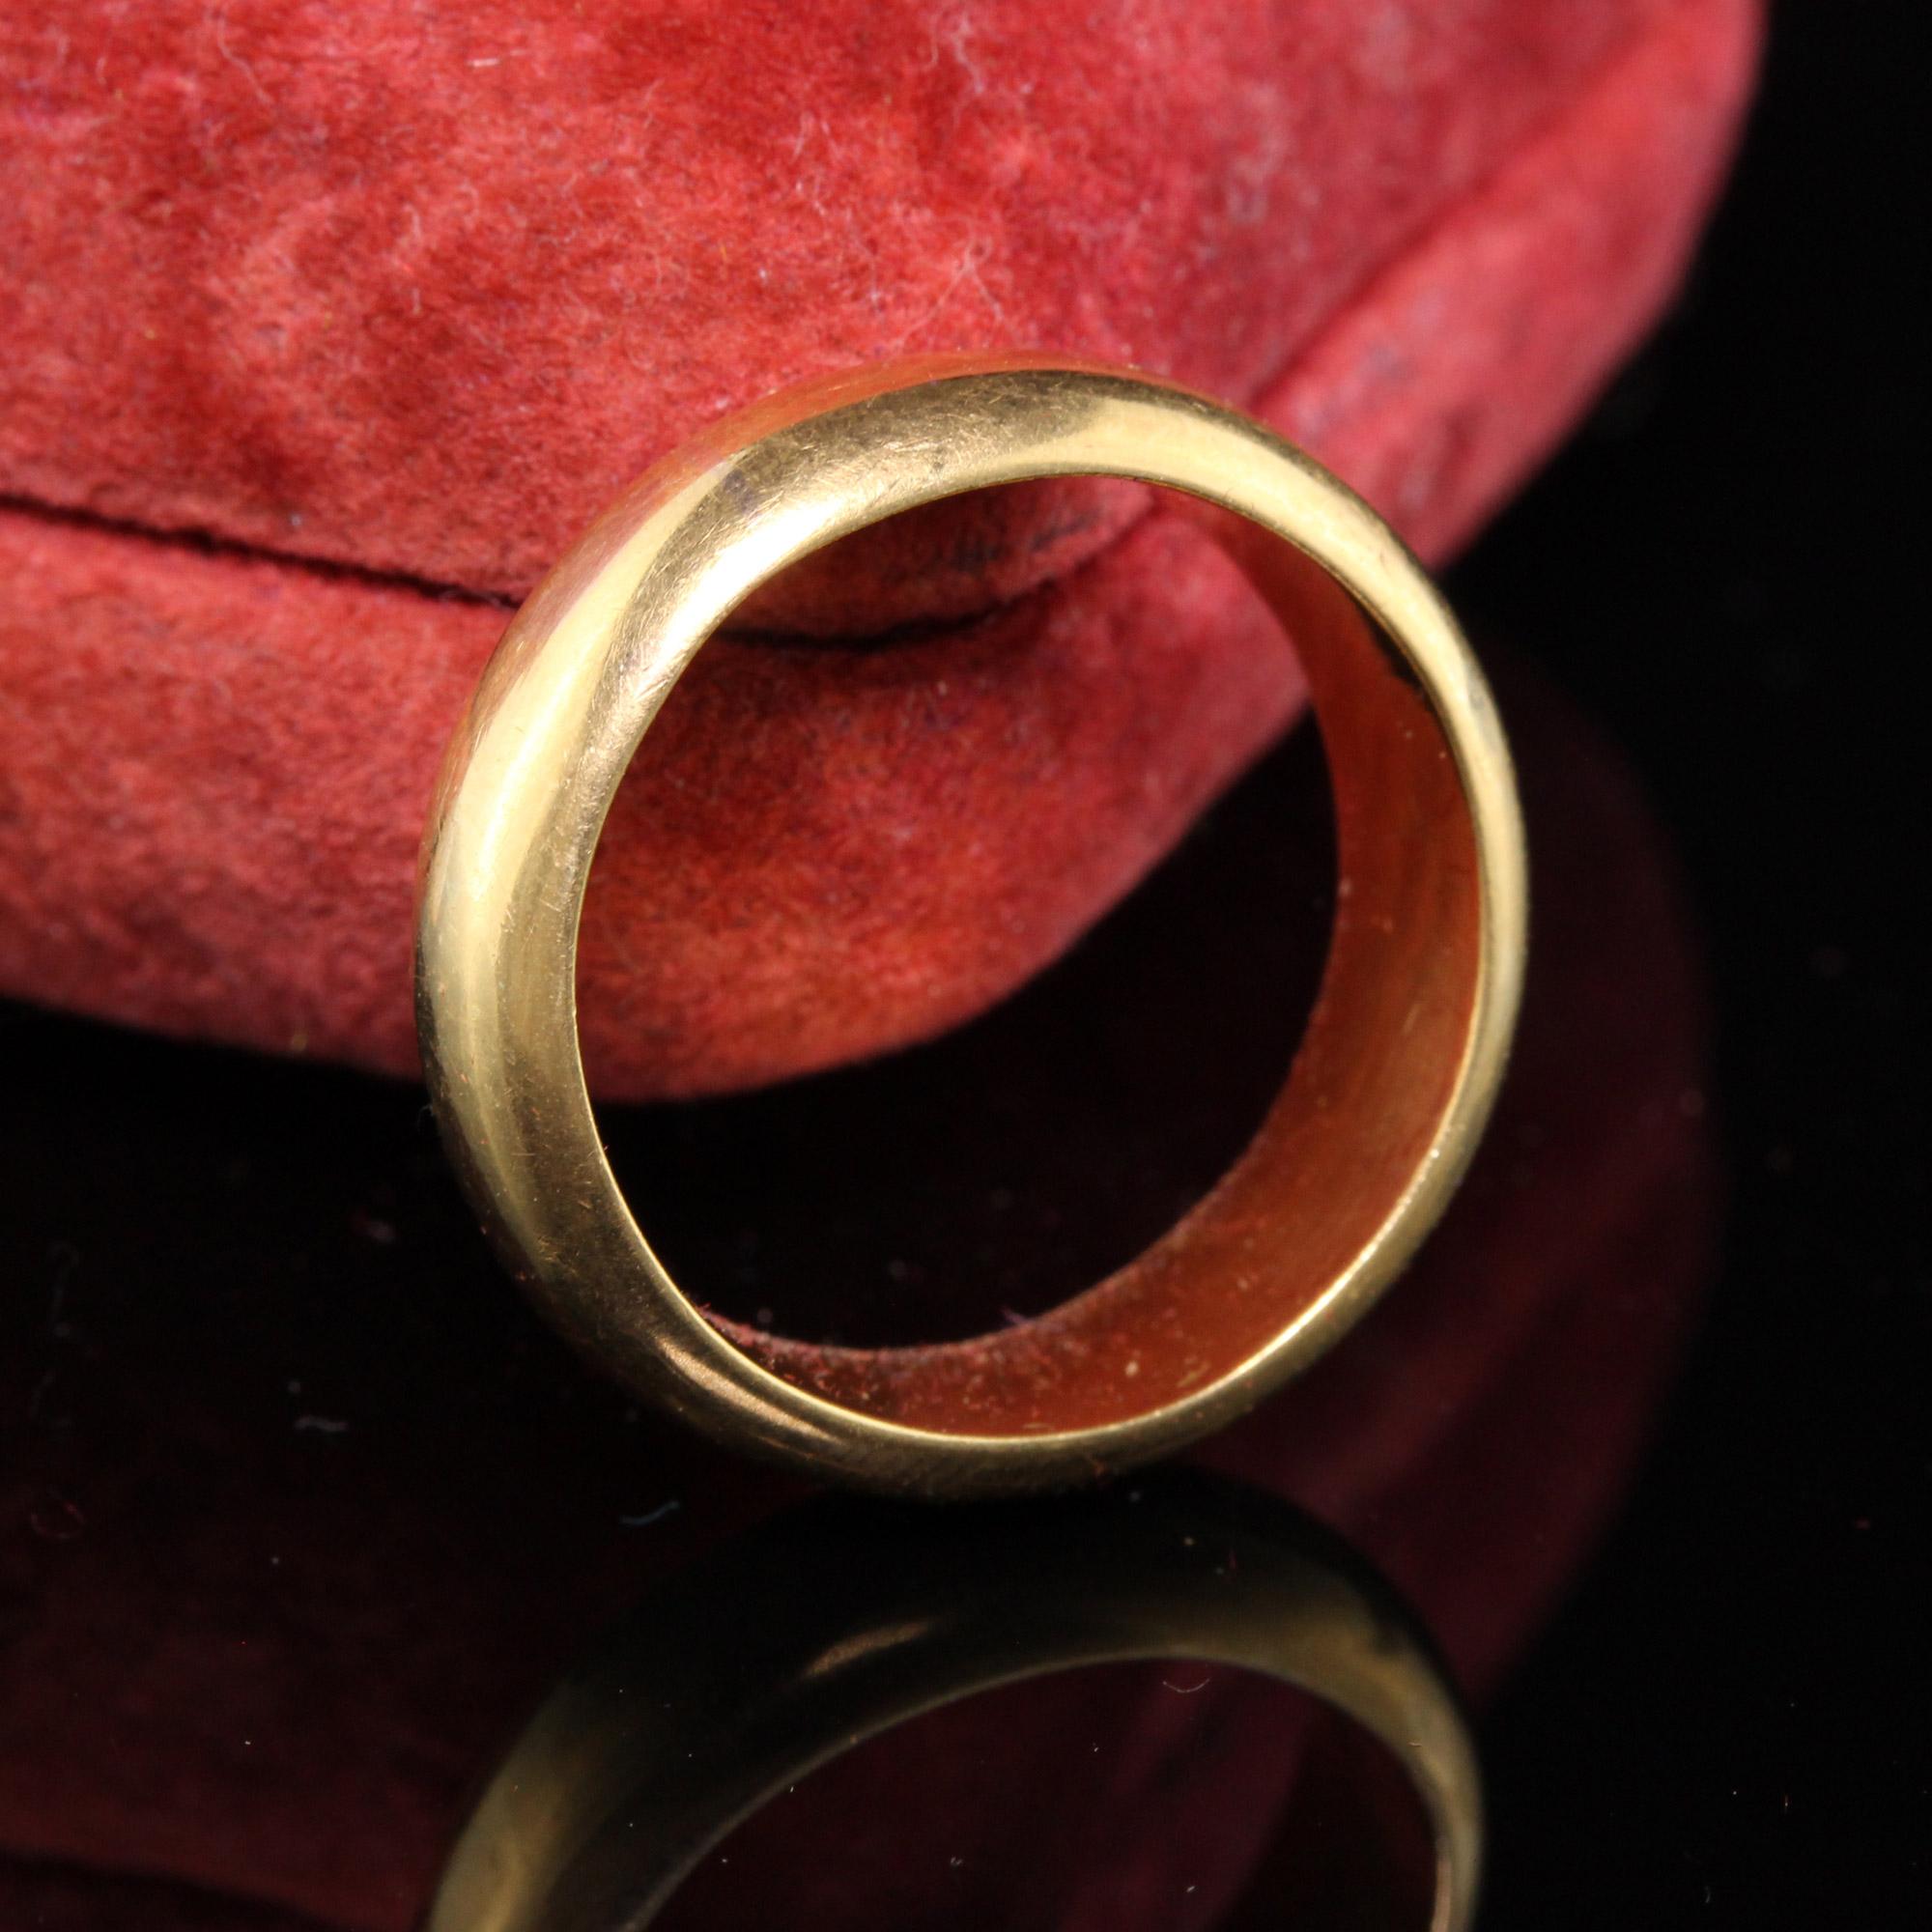 Beautiful Antique Victorian 18K Yellow Gold Wide Engraved Wedding Band. This simple beautifully crafted band is thick and wide. The inside of the band is engraved 